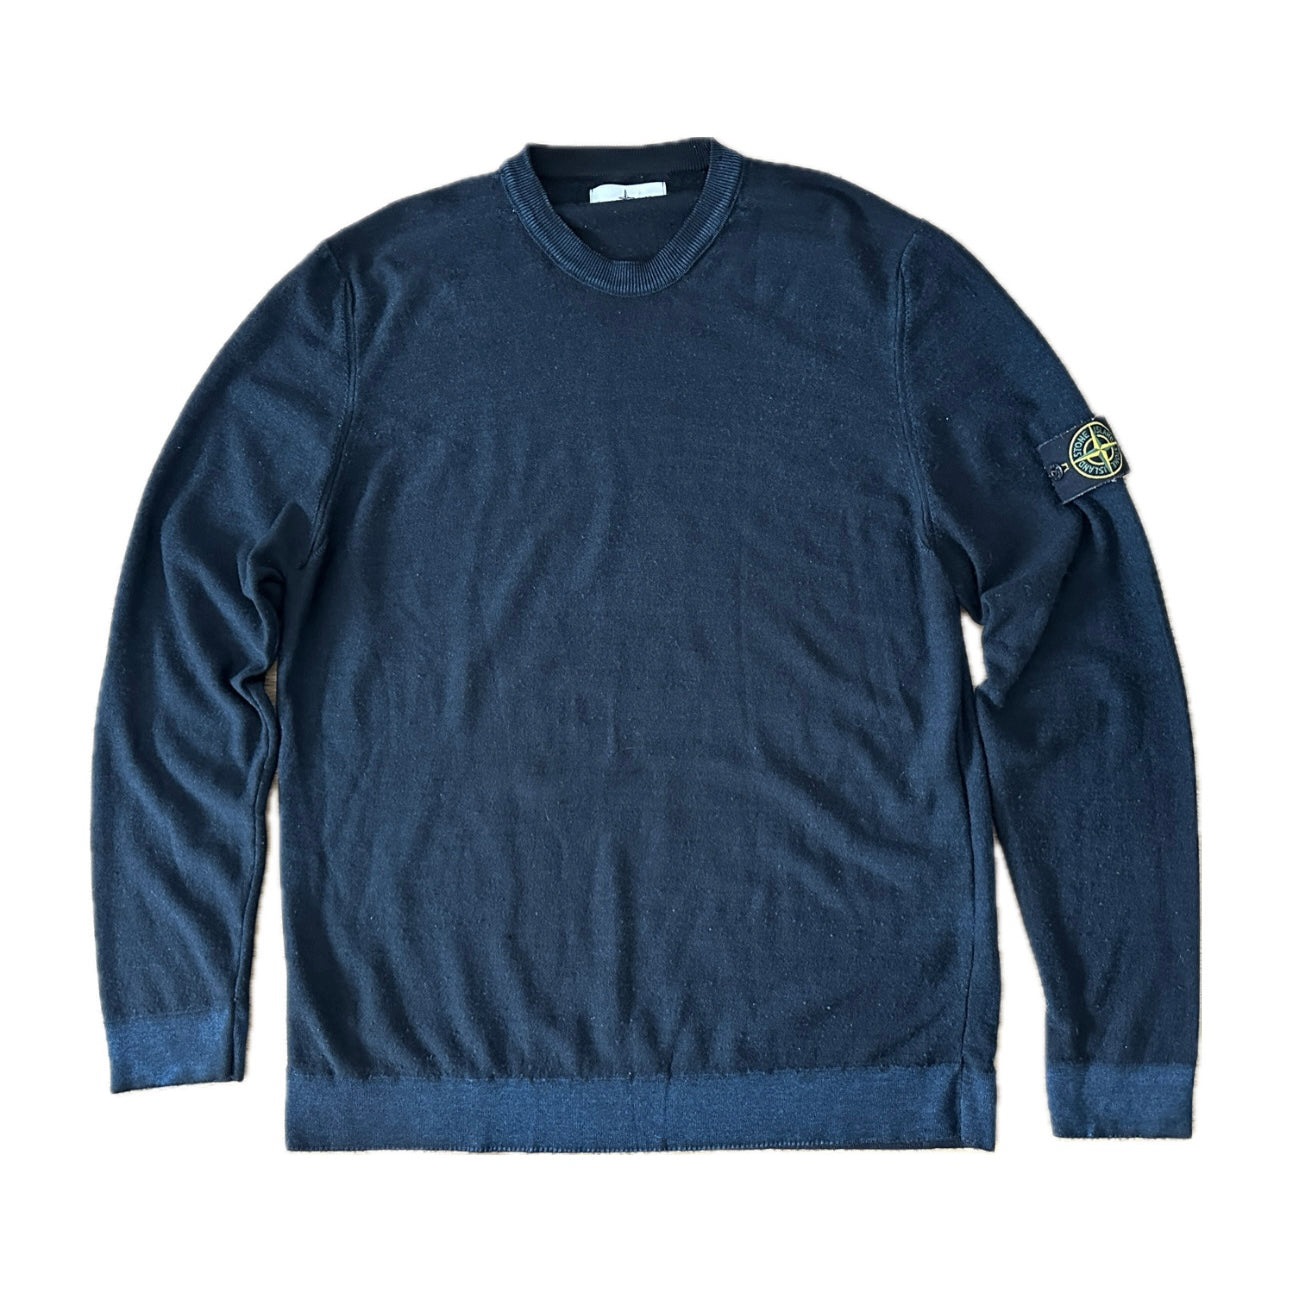 Stone Island 2016 Wool Knit Sweater Navy - 3XL - Made in Italy